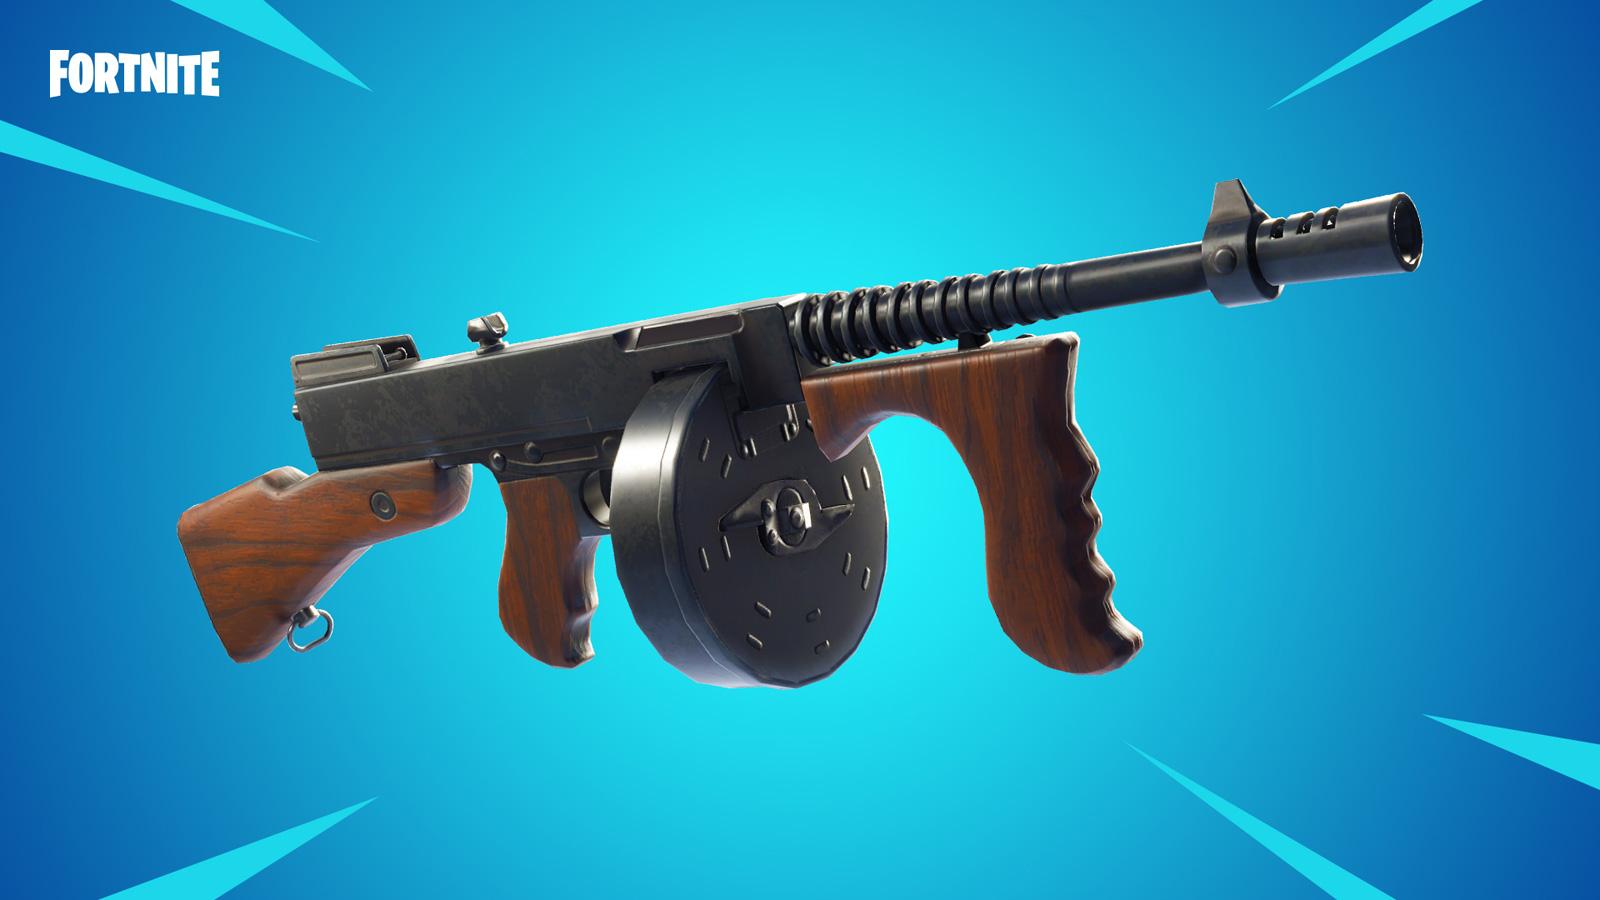 fortnite battle royale drum gun banned for being too powerful - deleted items fortnite